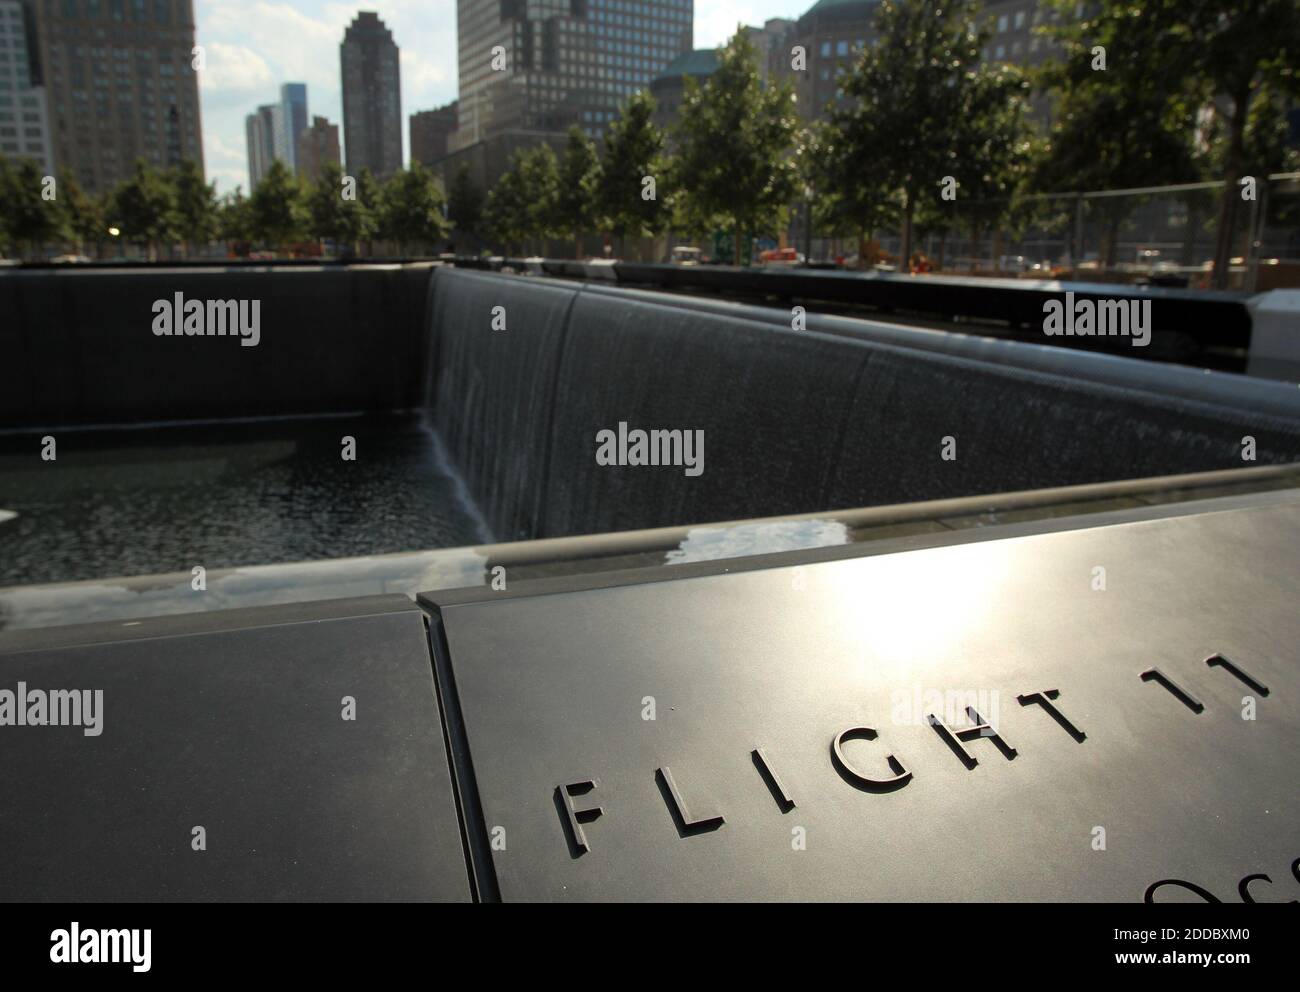 NO FILM, NO VIDEO, NO TV, NO DOCUMENTARY - An inscription details one of the flights that crashed on September 11, 2001, at the National September 11 Memorial in New York City. Bronze panels that ring the memorials two pools bear the names of all 9/11 victims, as well as those who died during the 1993 trade center attack. Photo by Scott Strazzante/Chicago Tribune/MCT/ABACAPRESS.COM Stock Photo